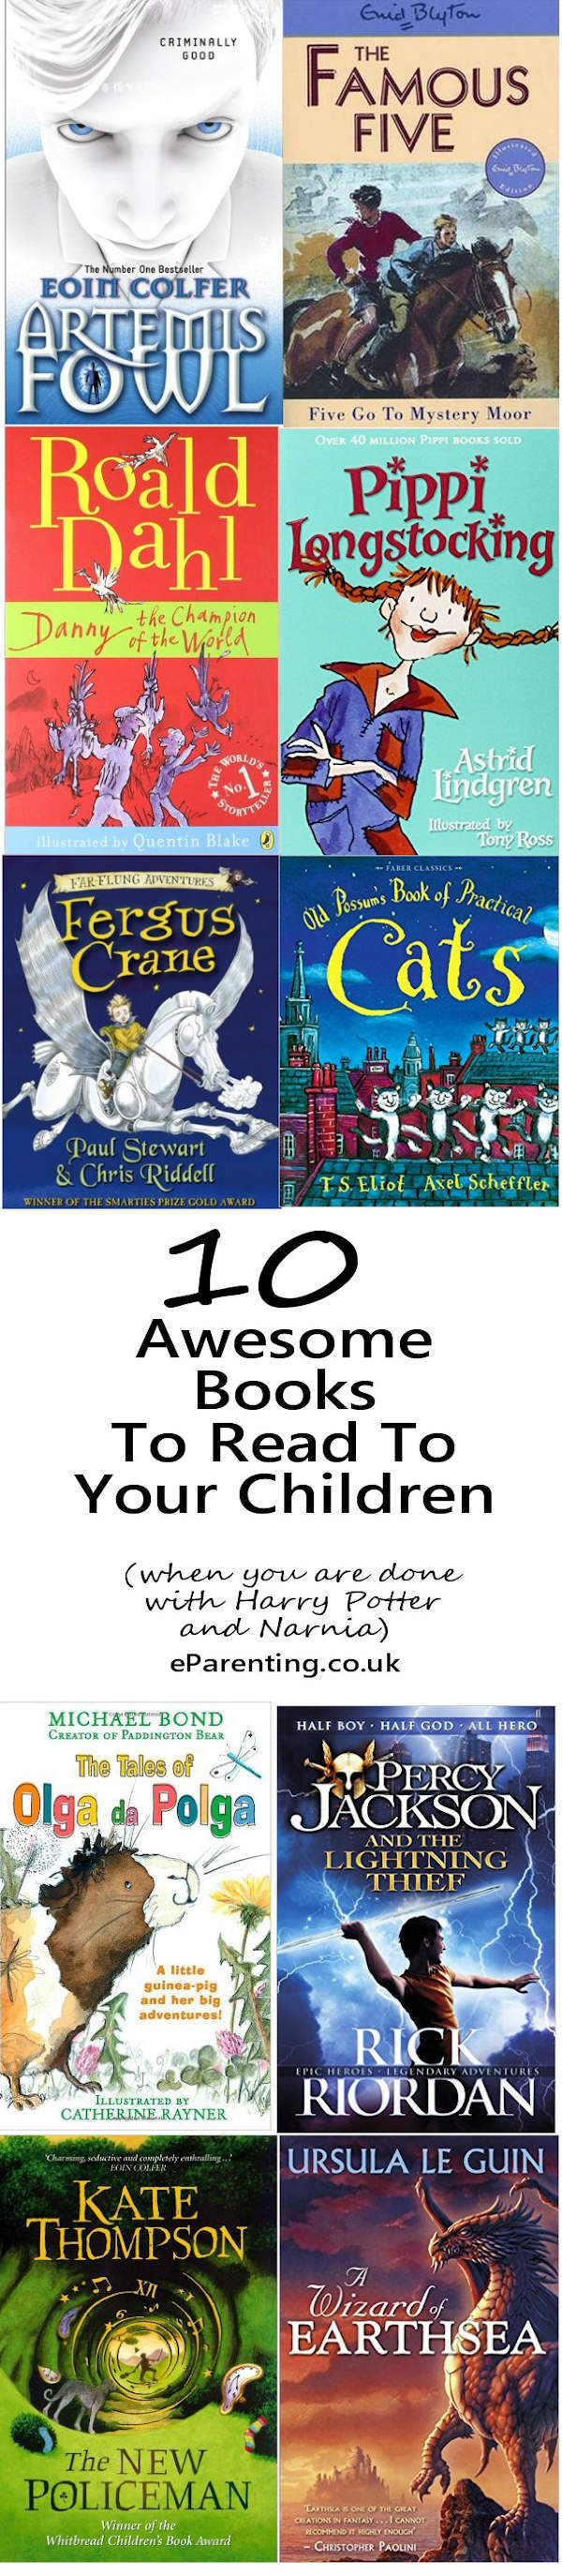 10 Awesome Books To Read To Your Children (when you are done with Harry Potter and Narnia)